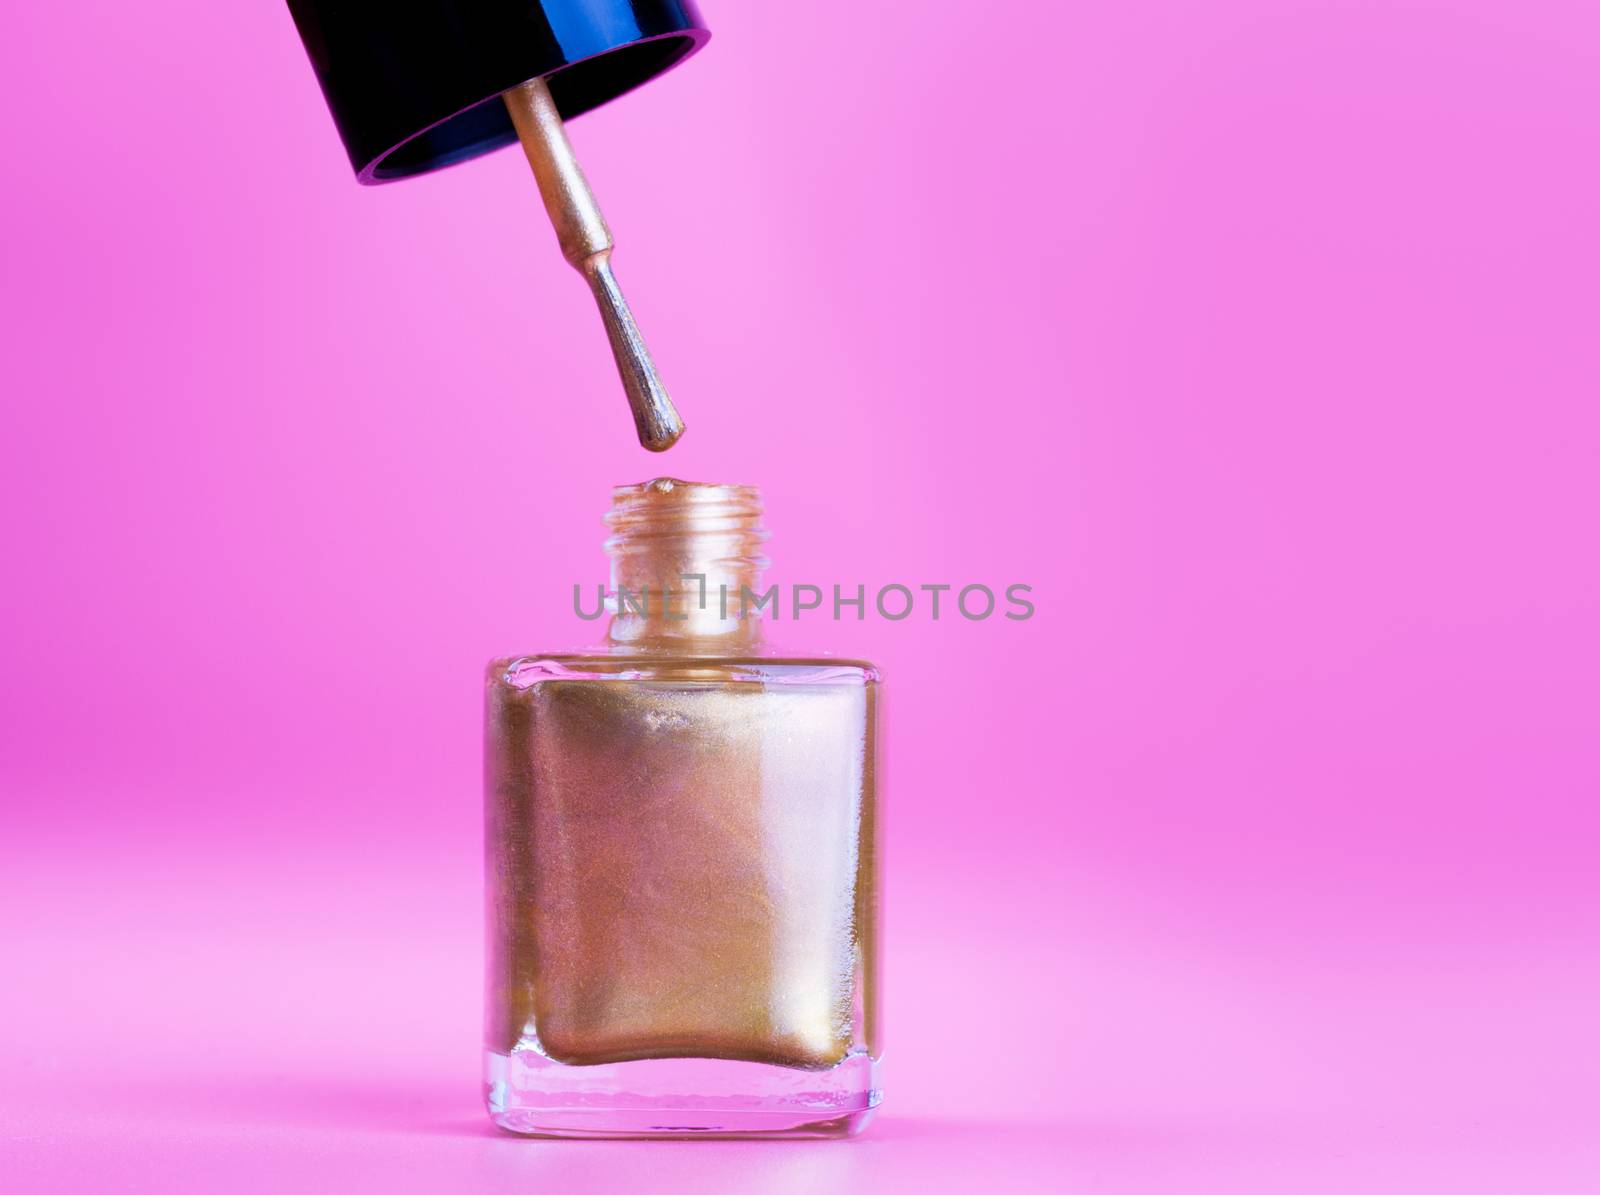 Bottle of golden nail polish by lanalanglois